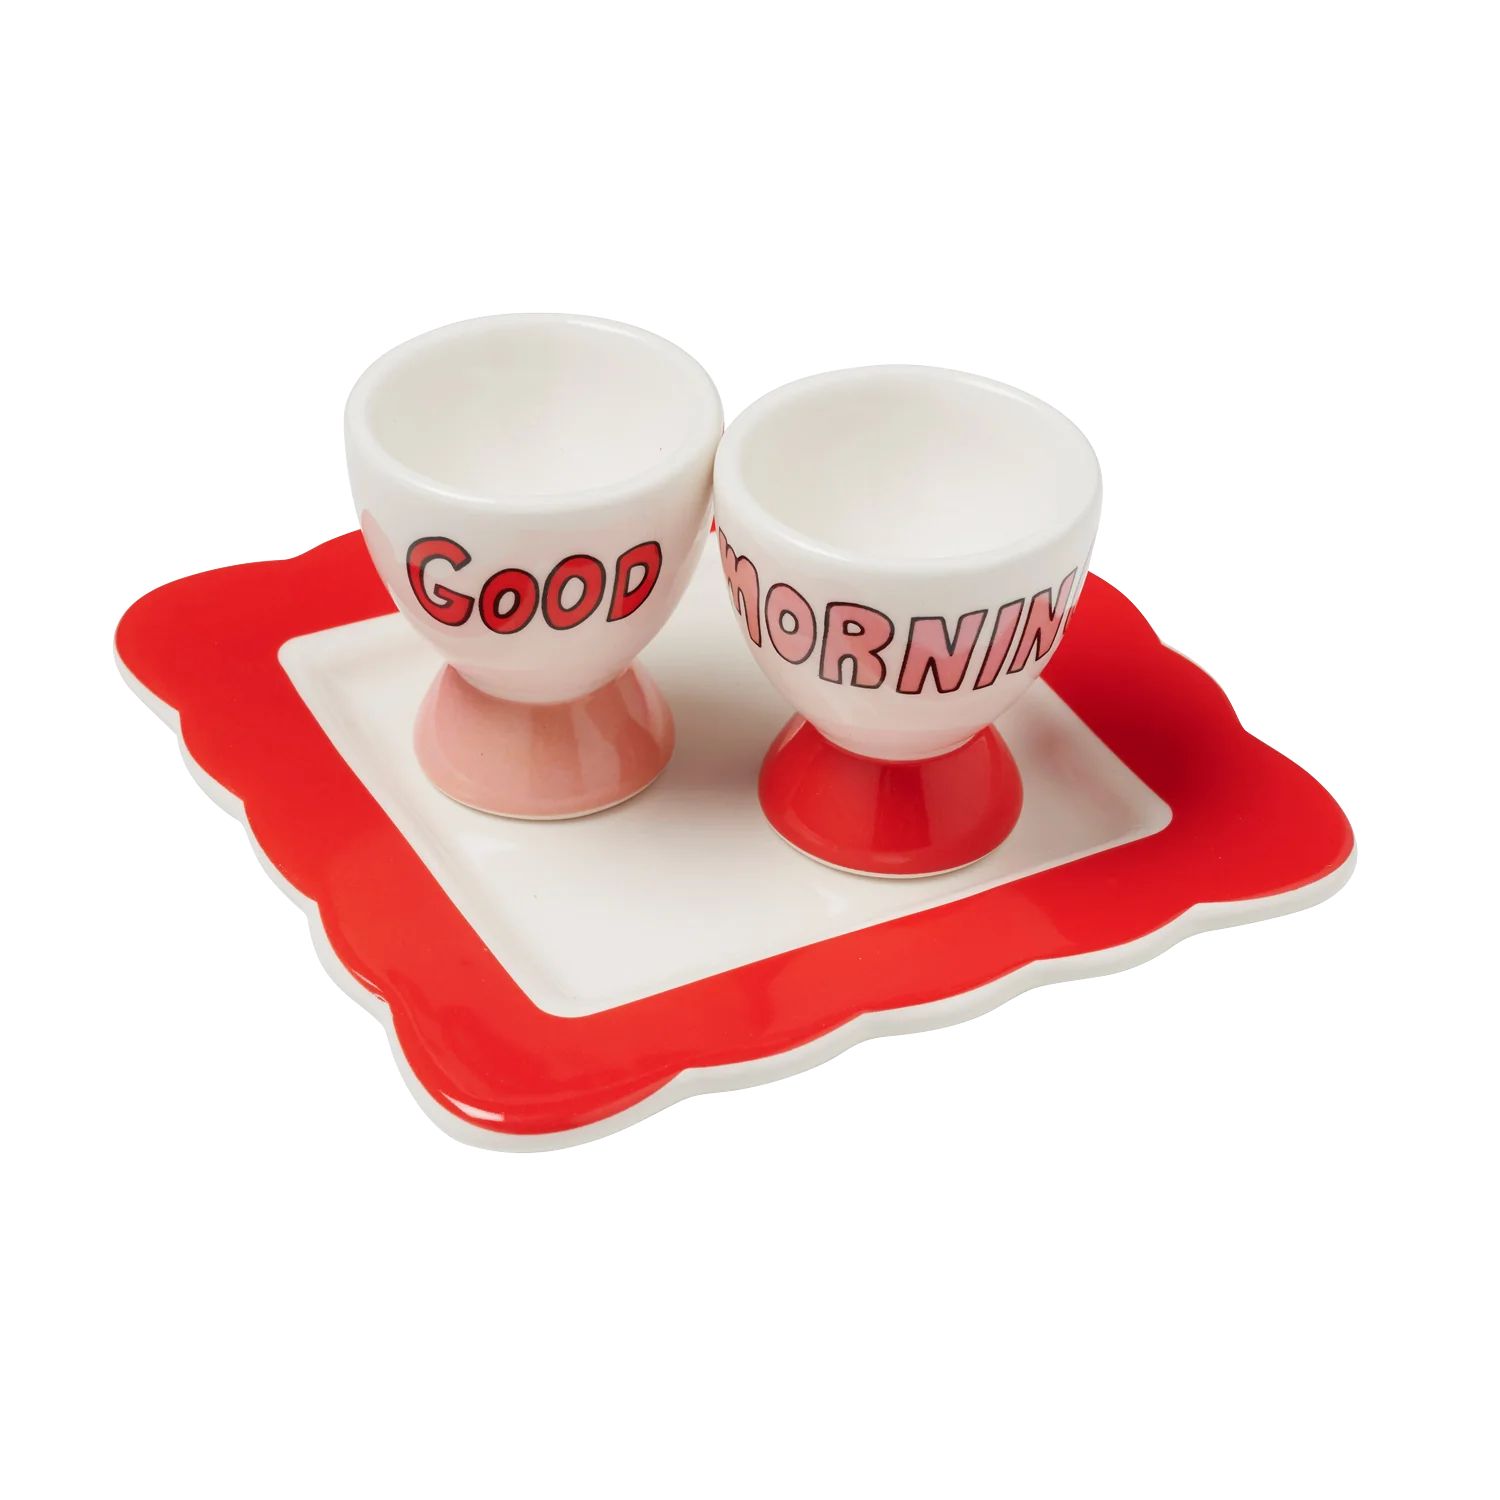 Good Morning Egg Cup Set | In the Roundhouse